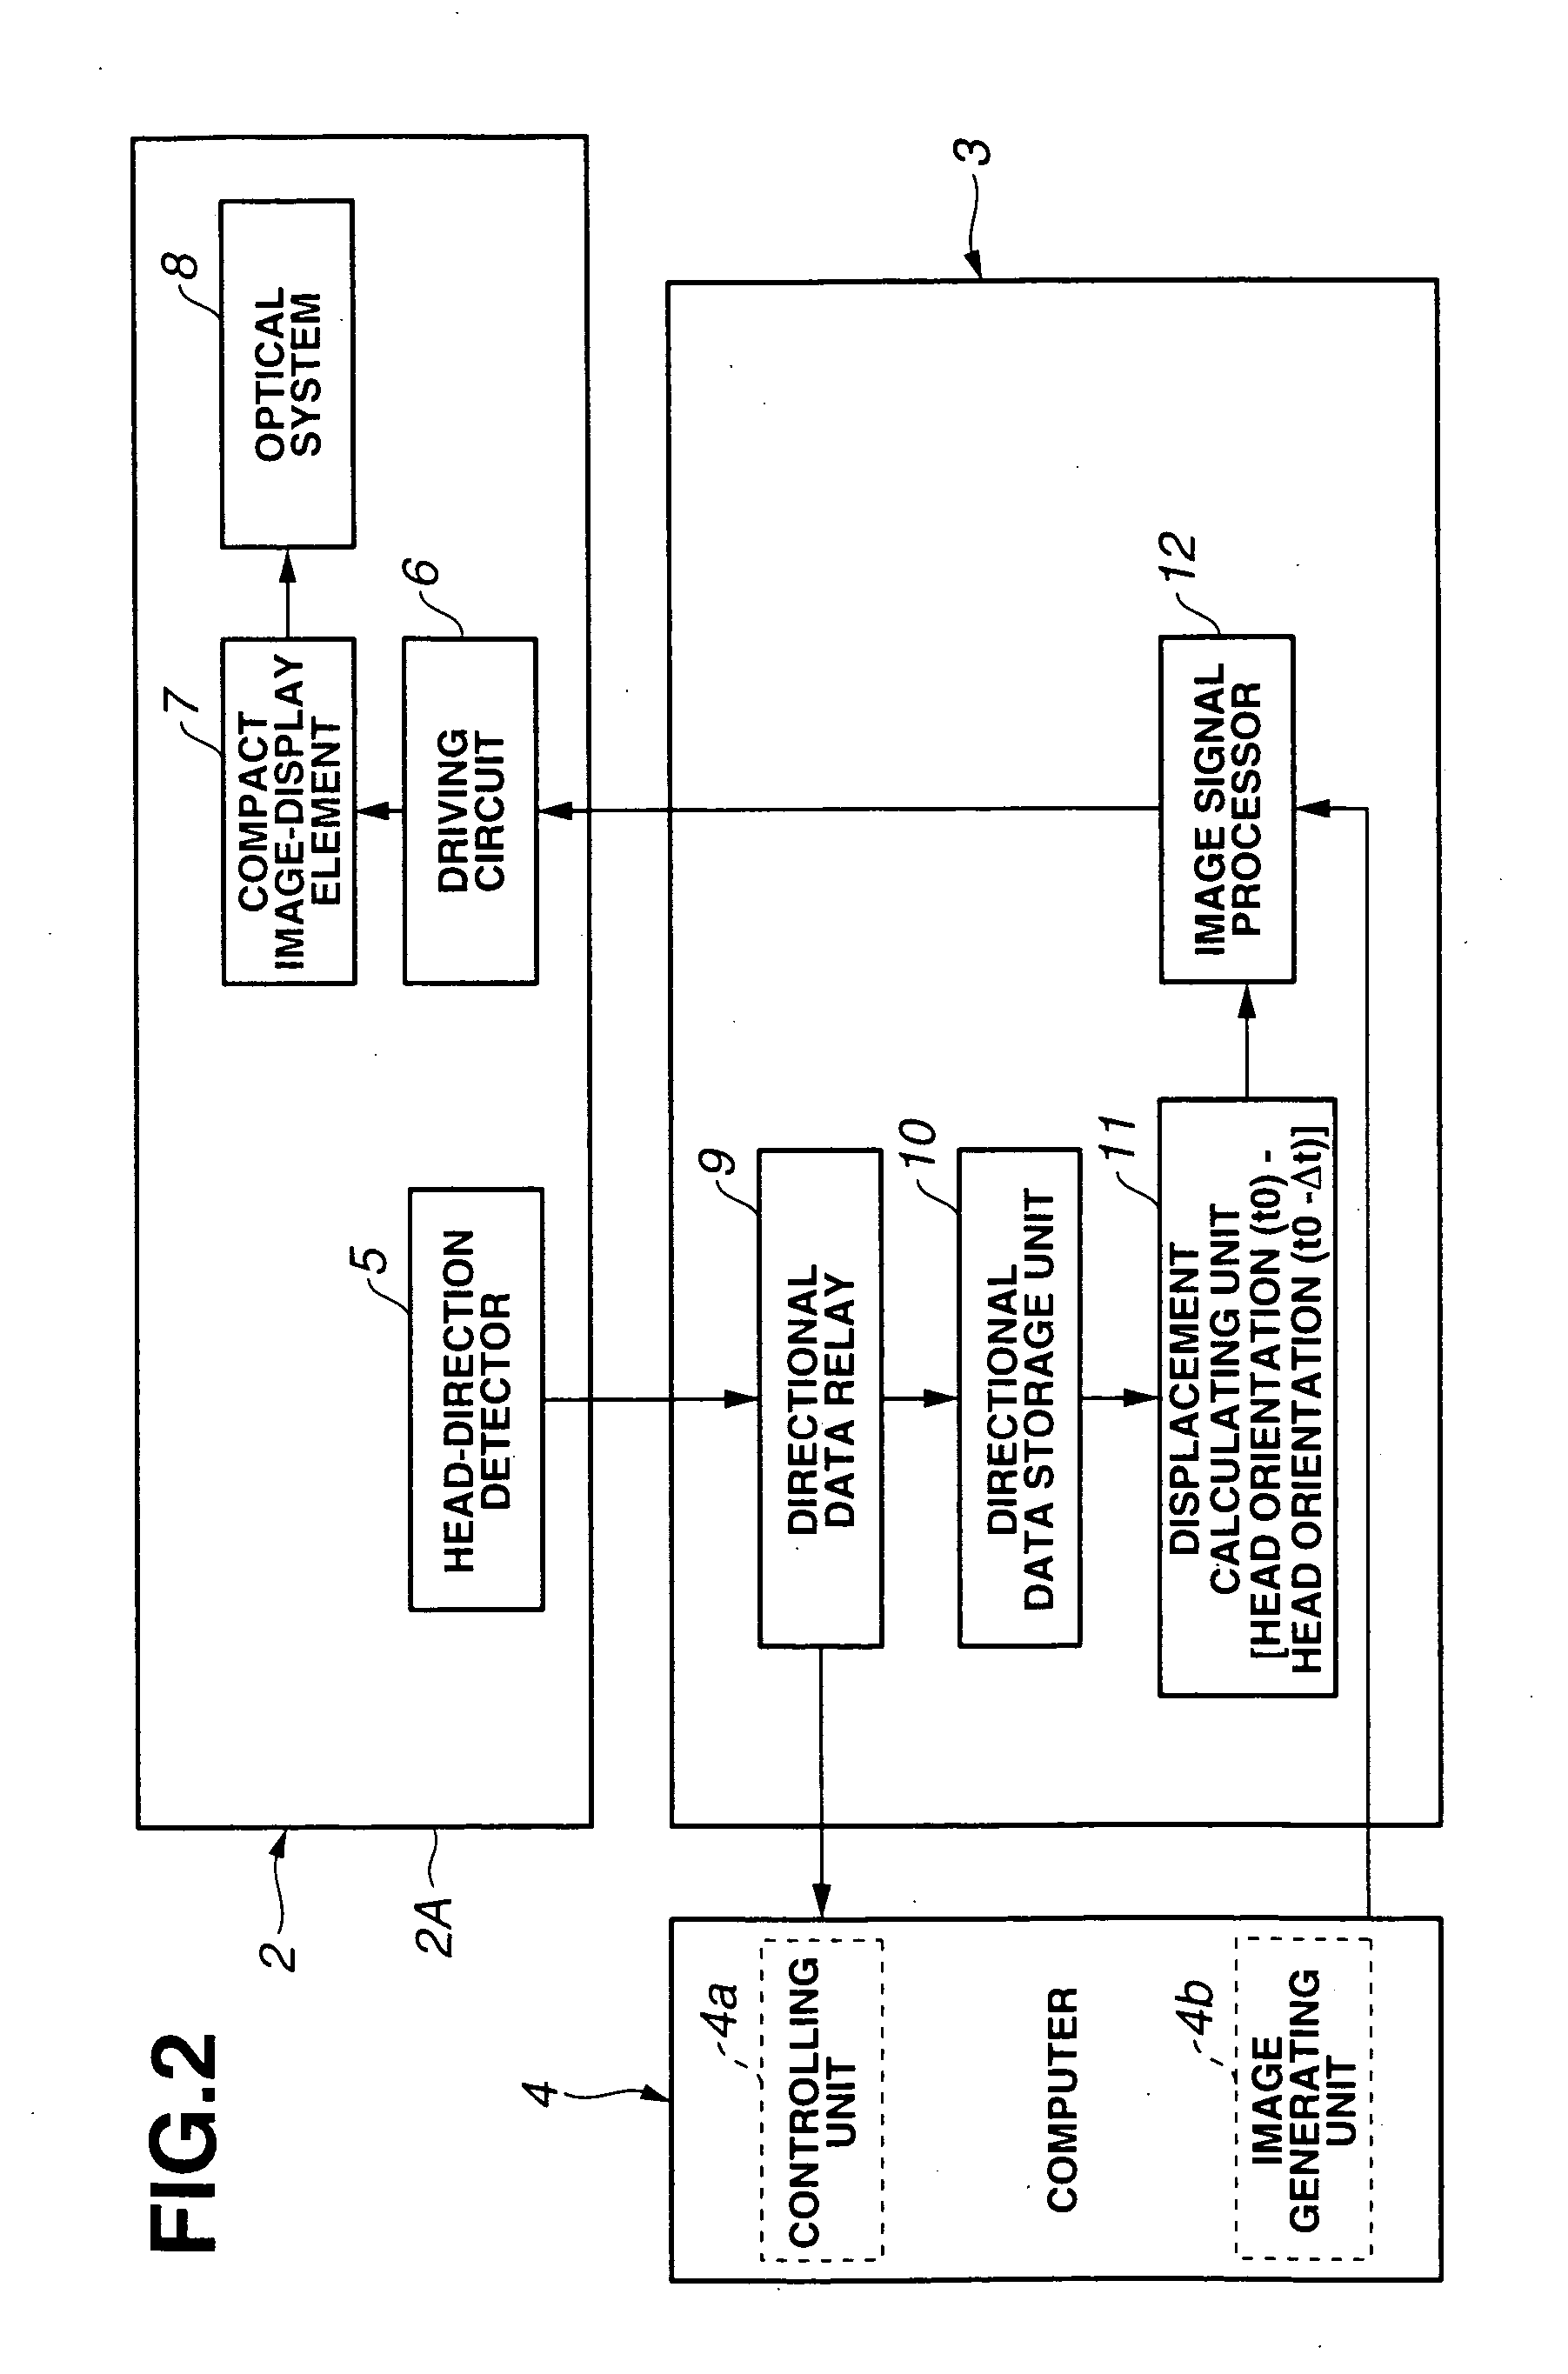 Head-mounted display system and method for processing images